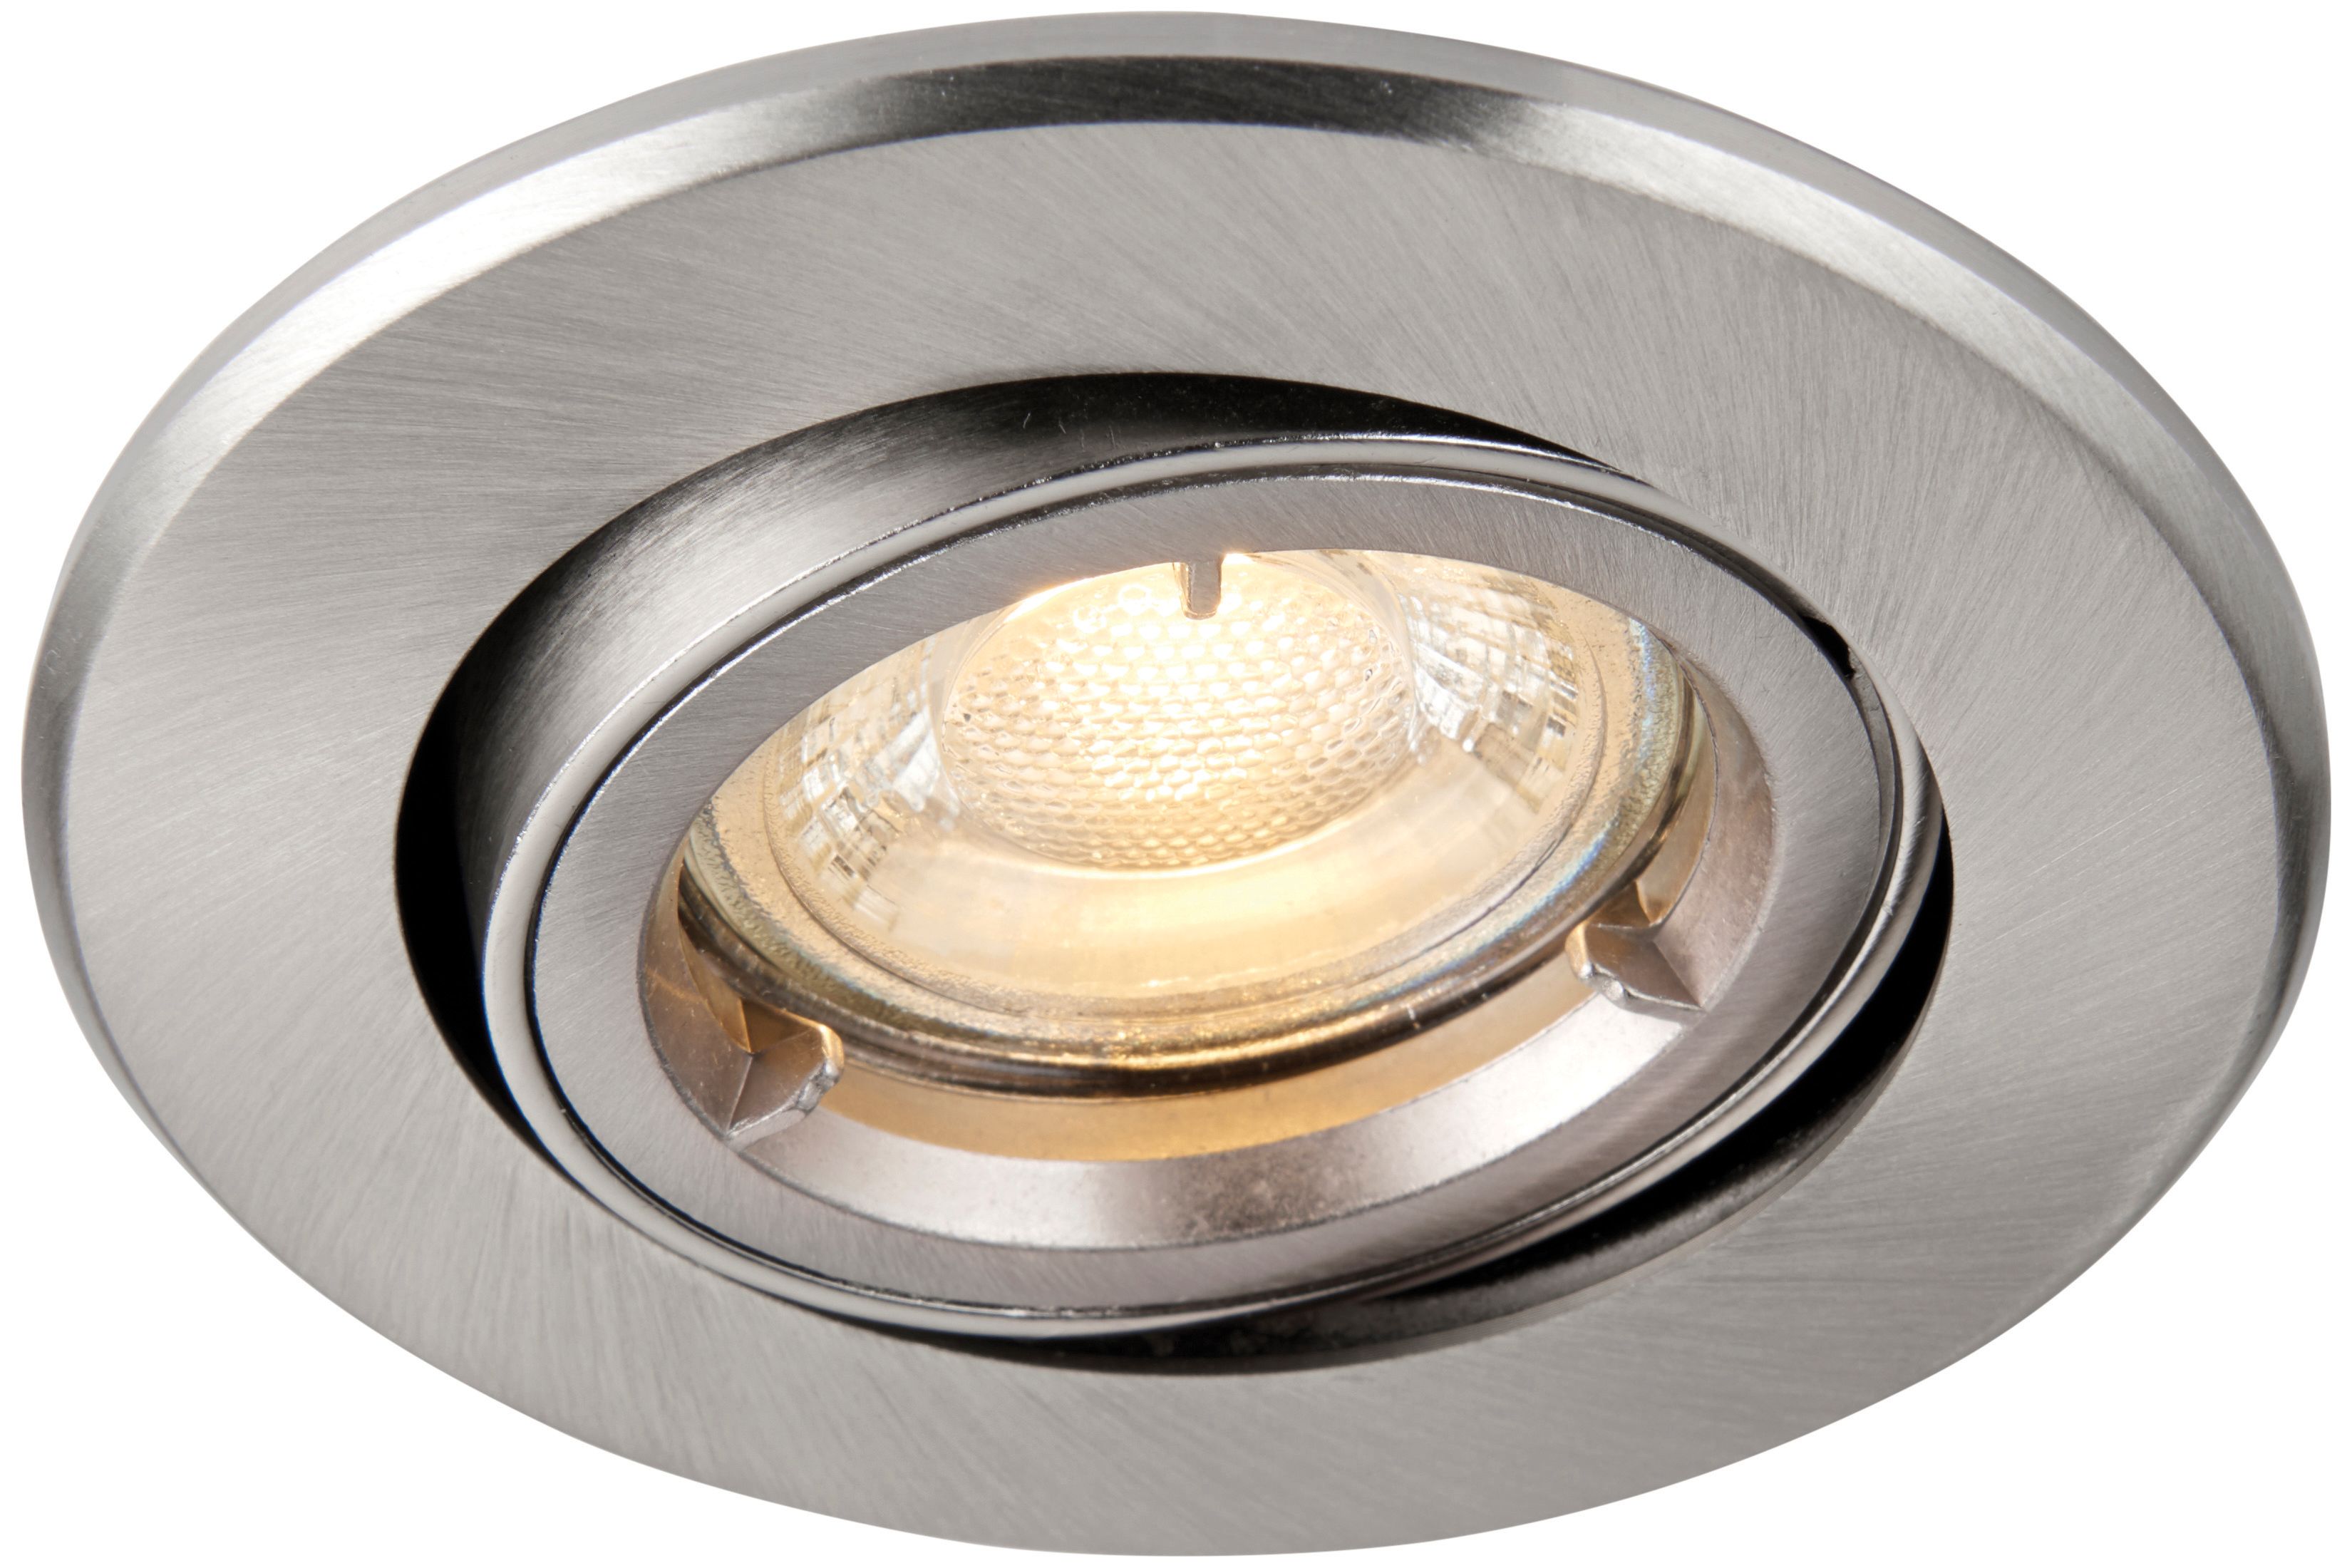 Saxby GU10 Fire Rated Cast Adjustable Downlight - Brushed Nickel